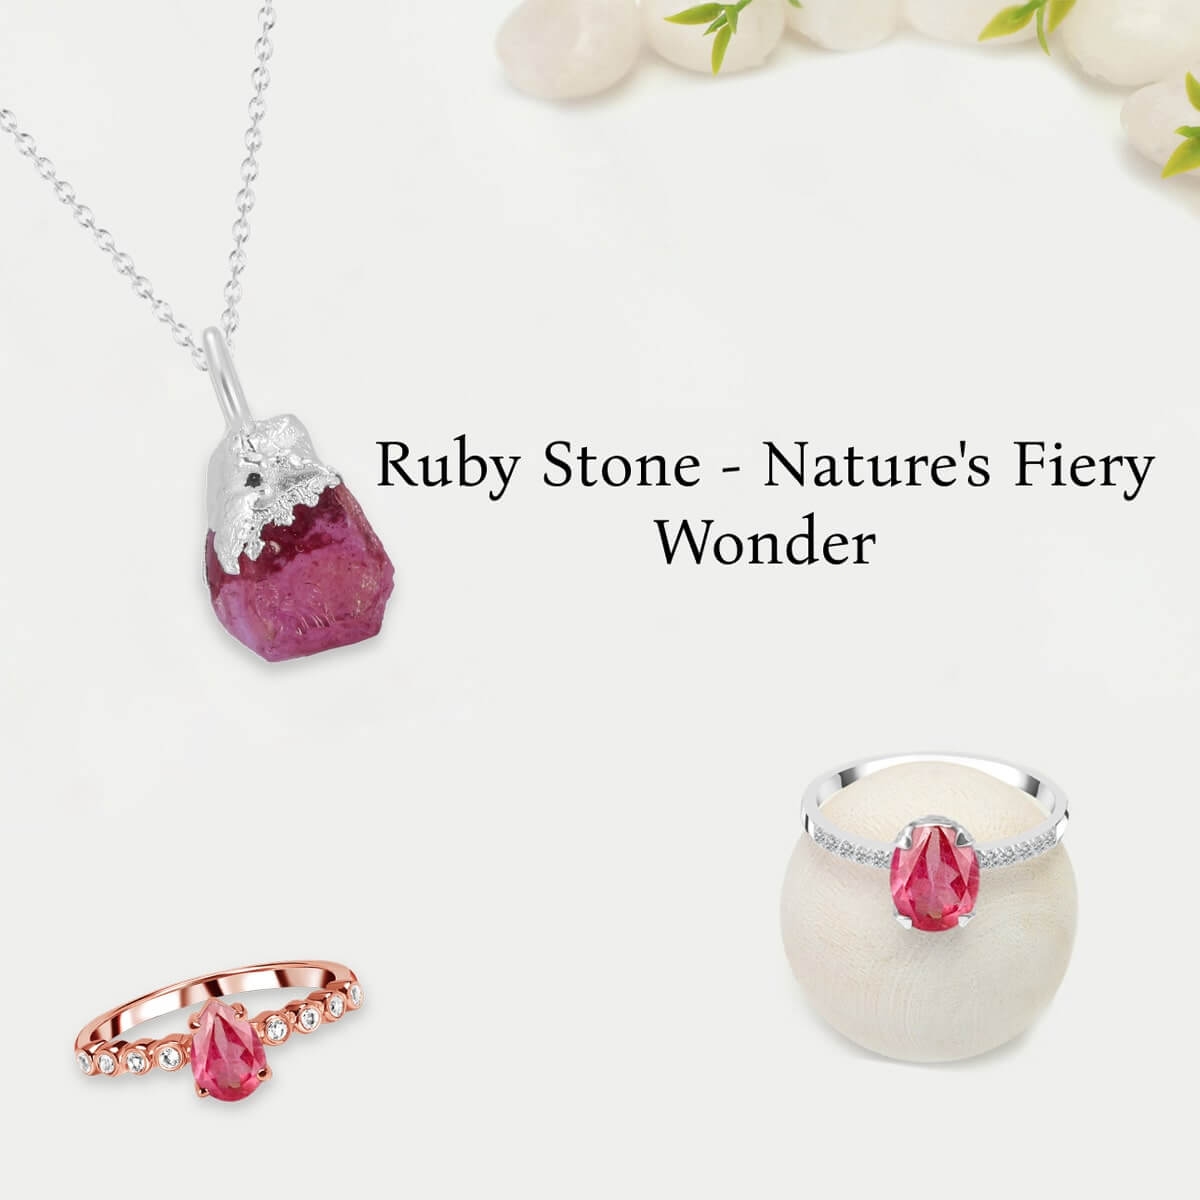 Physical Properties of Ruby Stone